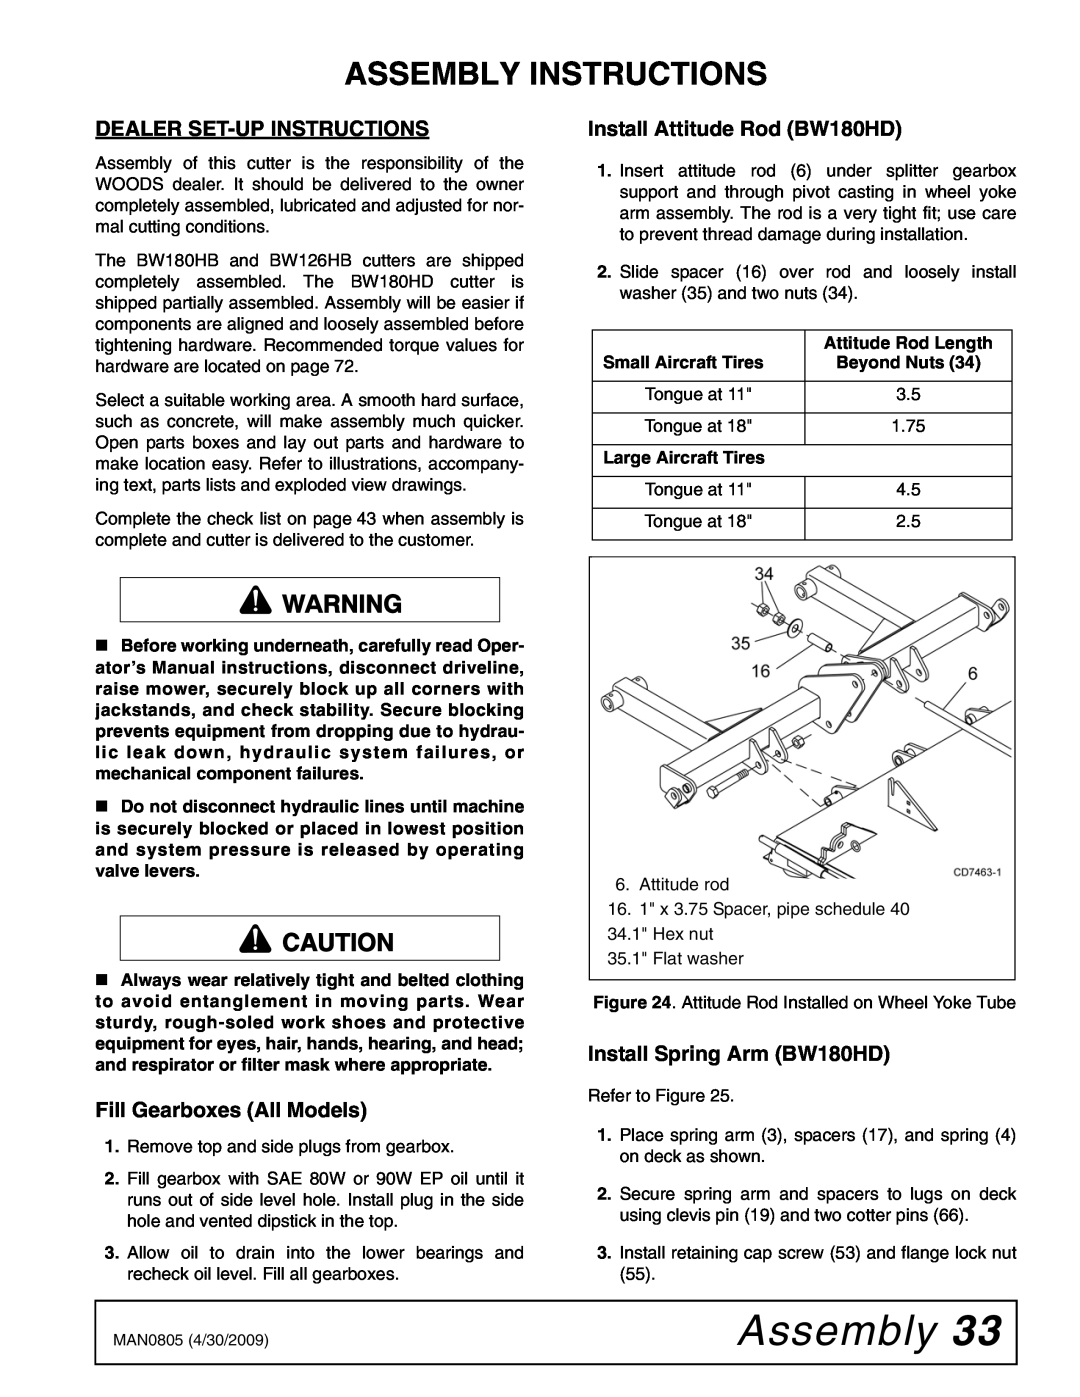 Woods Equipment BW180HB, BW180HDQ manual Assembly Instructions, Dealer Set-Upinstructions, Fill Gearboxes All Models 